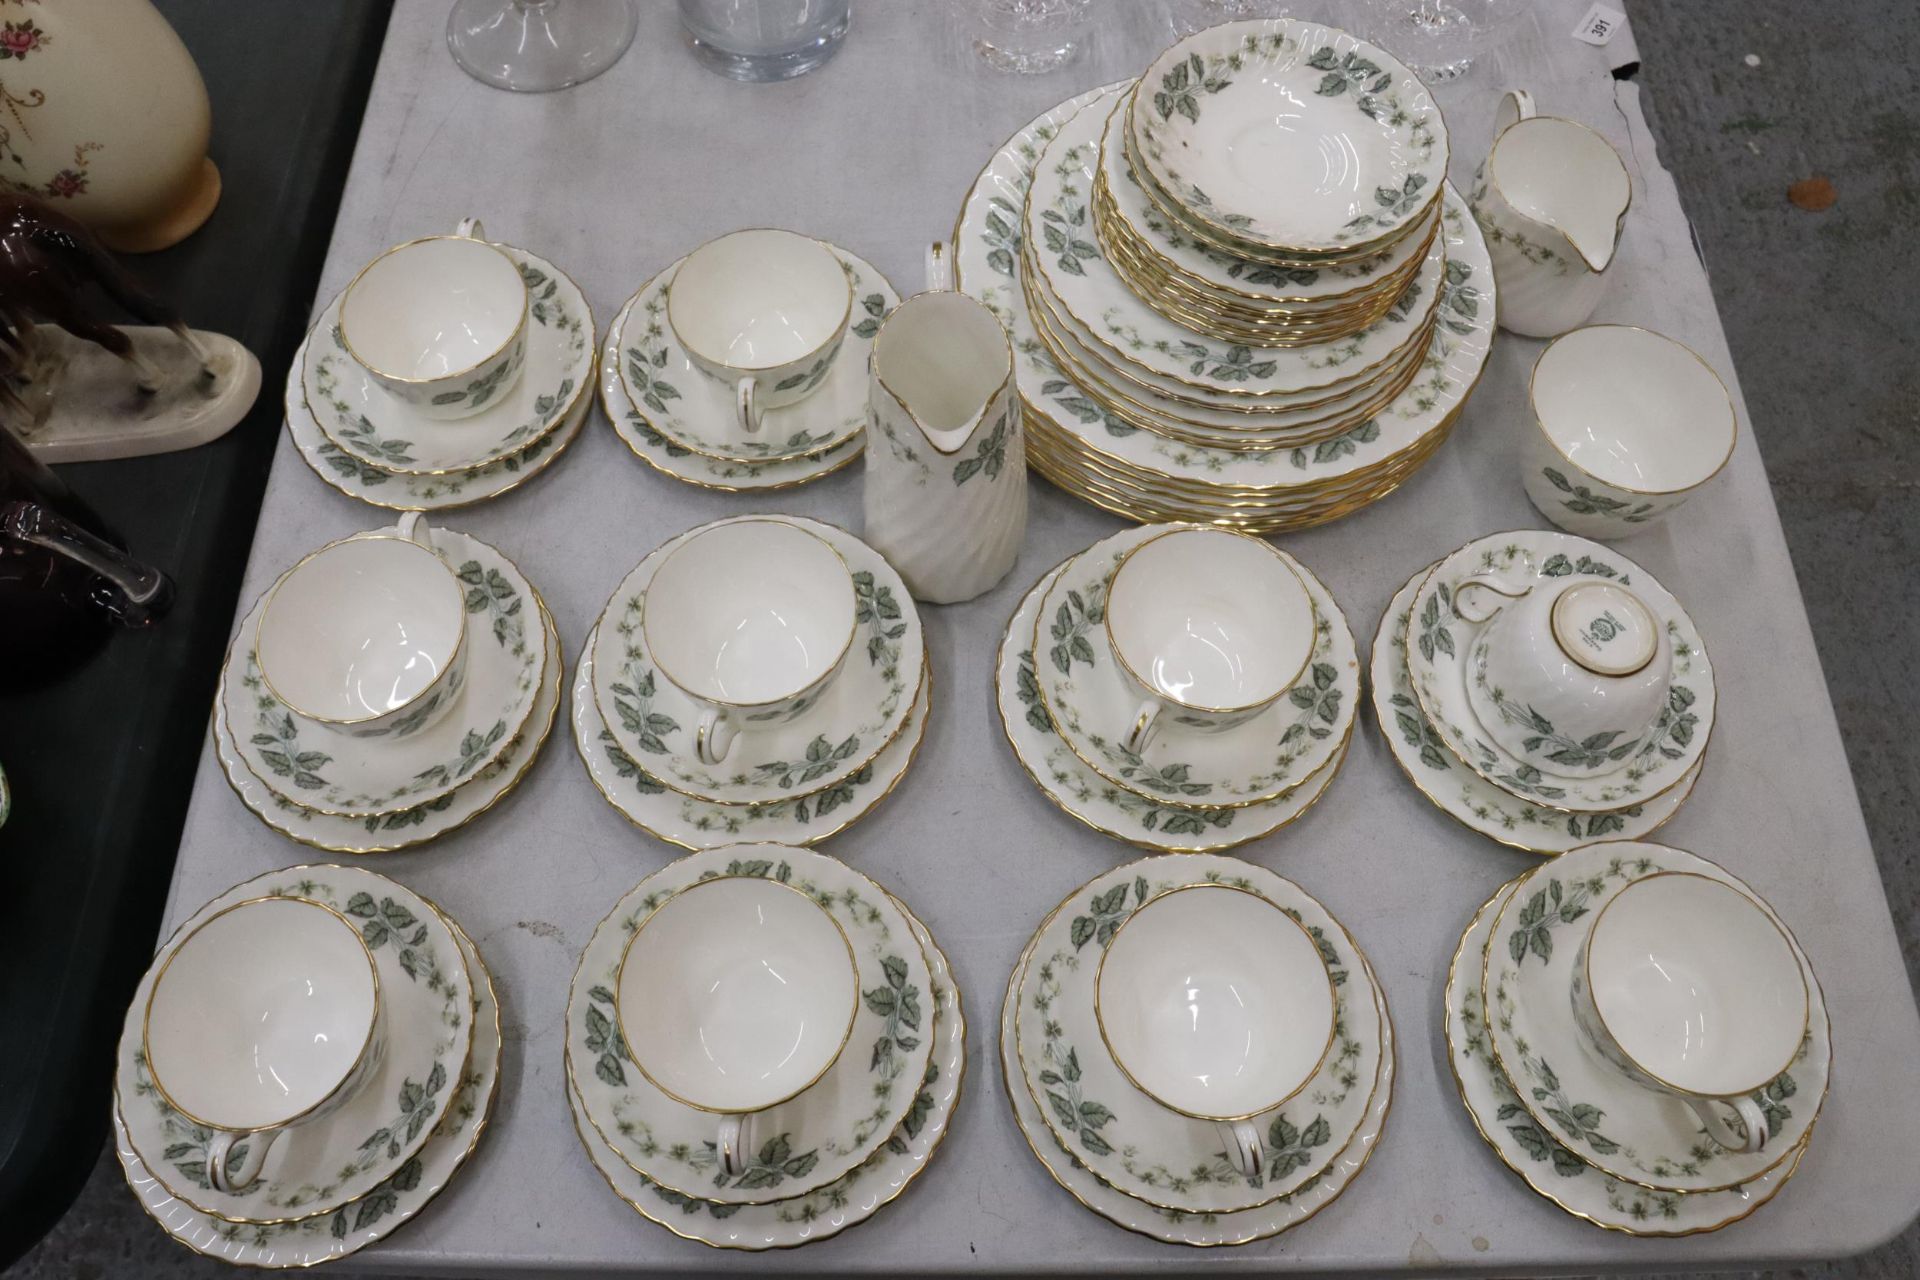 A MINTON GREENWICH TEASET TO INCLUDE CUPS, SAUCERS, DINNER PLATES, SALAD PLATES, ETC., - Image 2 of 6